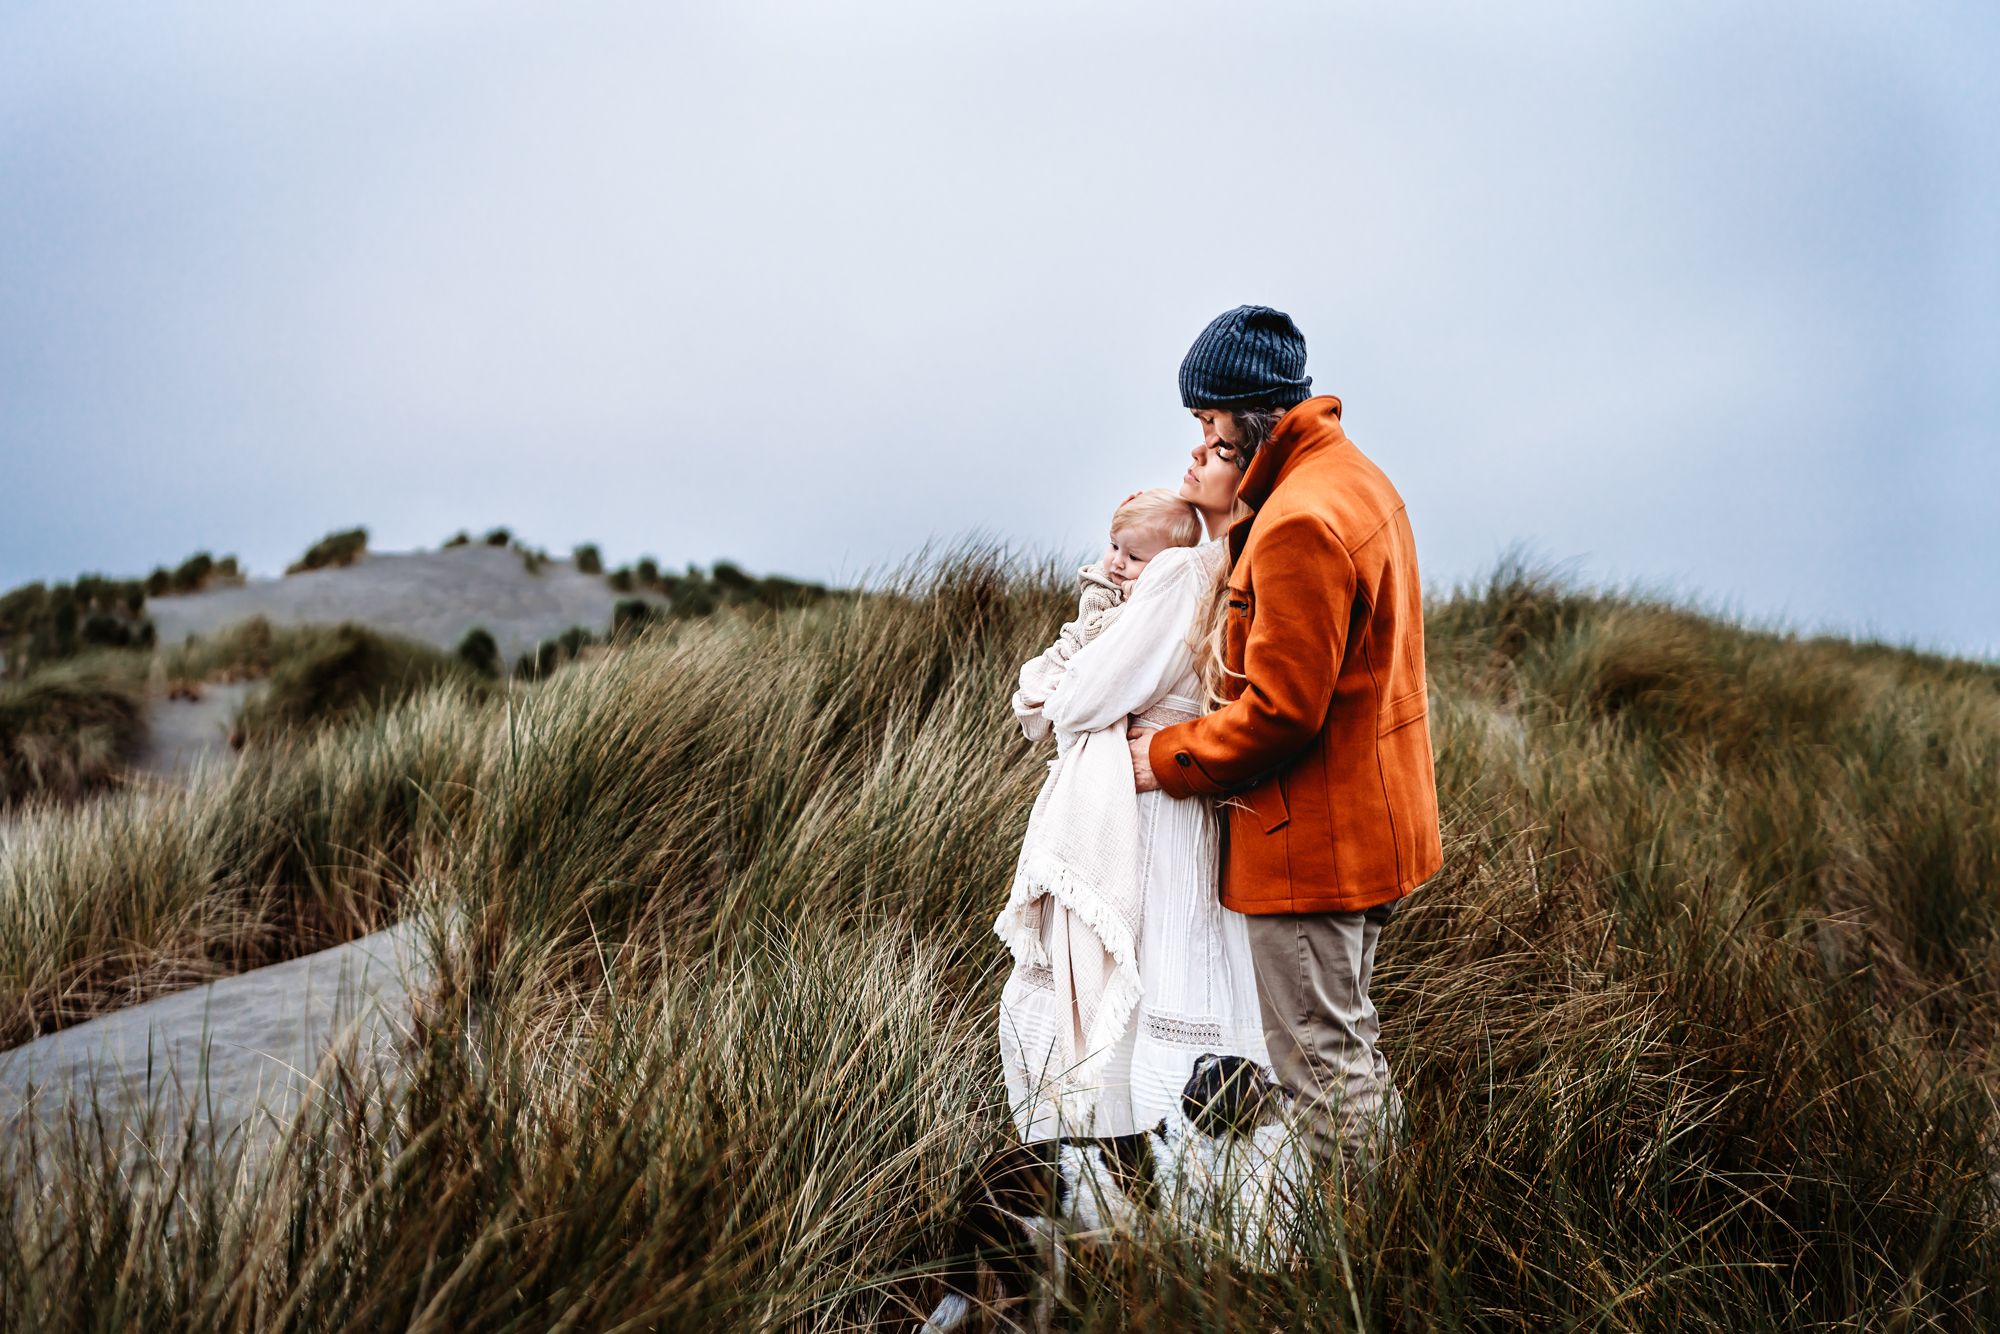 A man and woman stand on a grassy Oregon sand dune and embrace, while the woman is holding a baby.